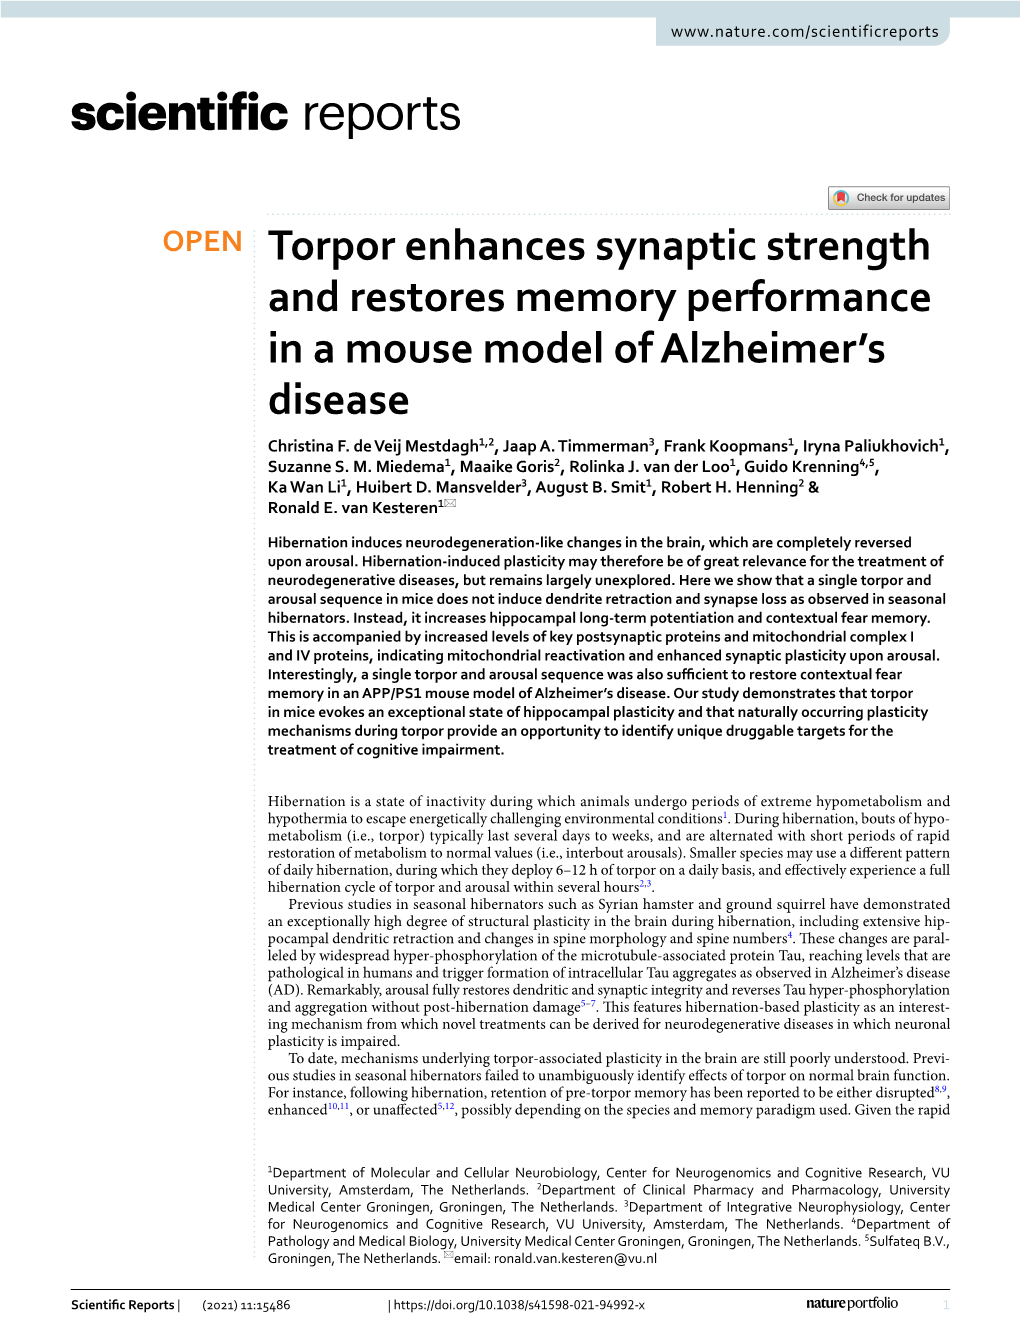 Torpor Enhances Synaptic Strength and Restores Memory Performance in a Mouse Model of Alzheimer's Disease